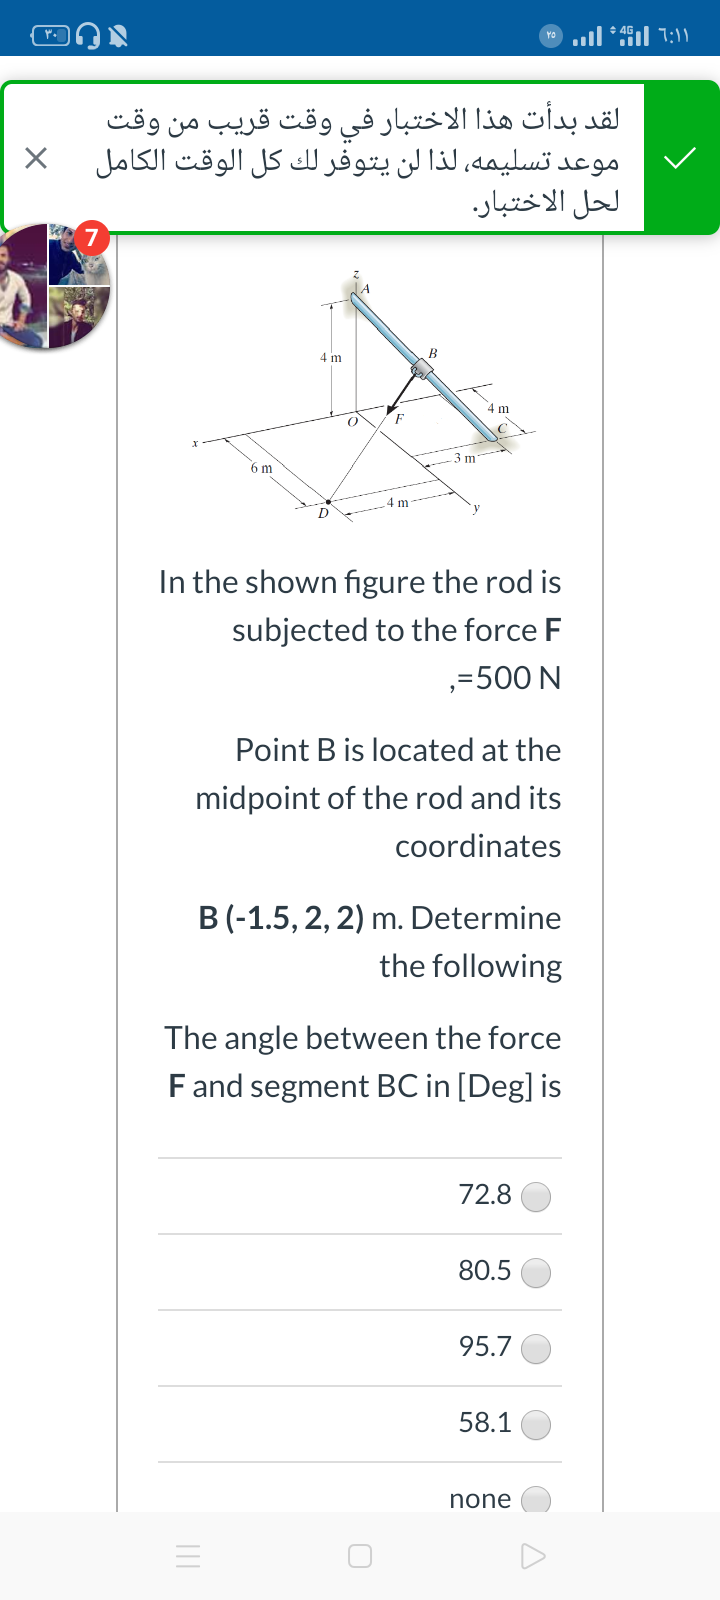 4 m
4 m
3 m*
6 m
4 m
D
In the shown figure the rod is
subjected to the force F
,=500 N
Point B is located at the
midpoint of the rod and its
coordinates
B (-1.5, 2, 2) m. Determine
the following
The angle between the force
Fand segment BC in [Deg] is
